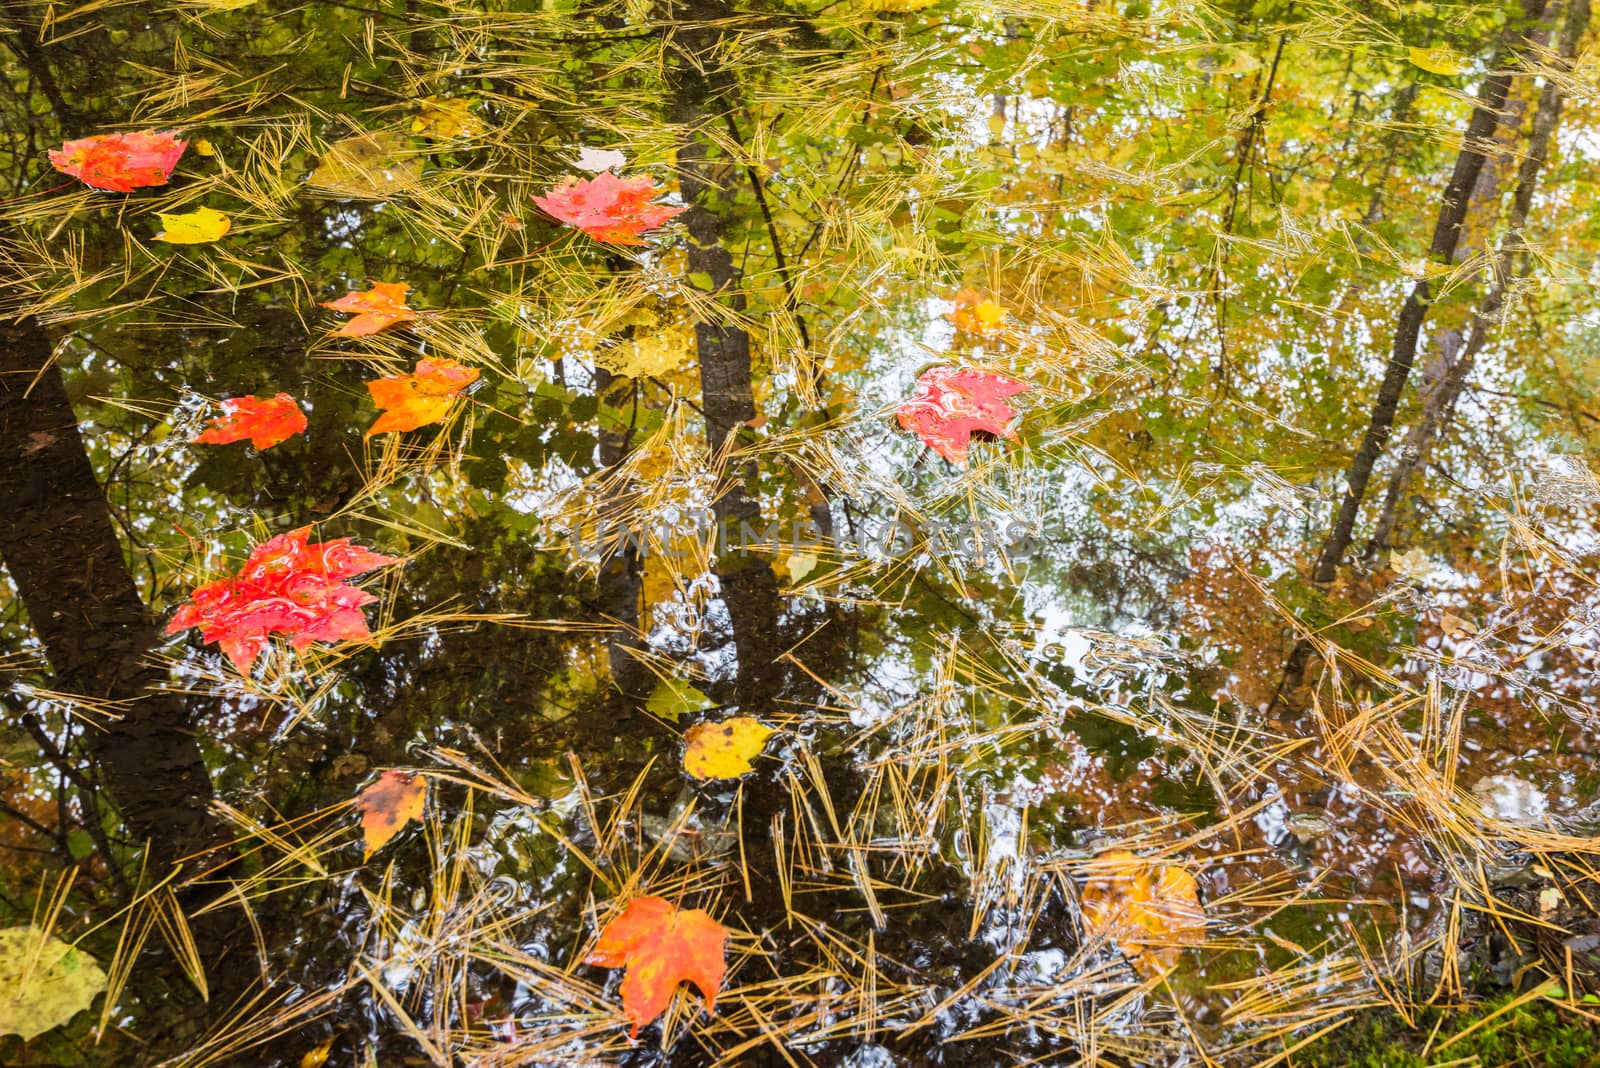 Surrounding trees are reflected in a small autumn forest puddle by nemo269